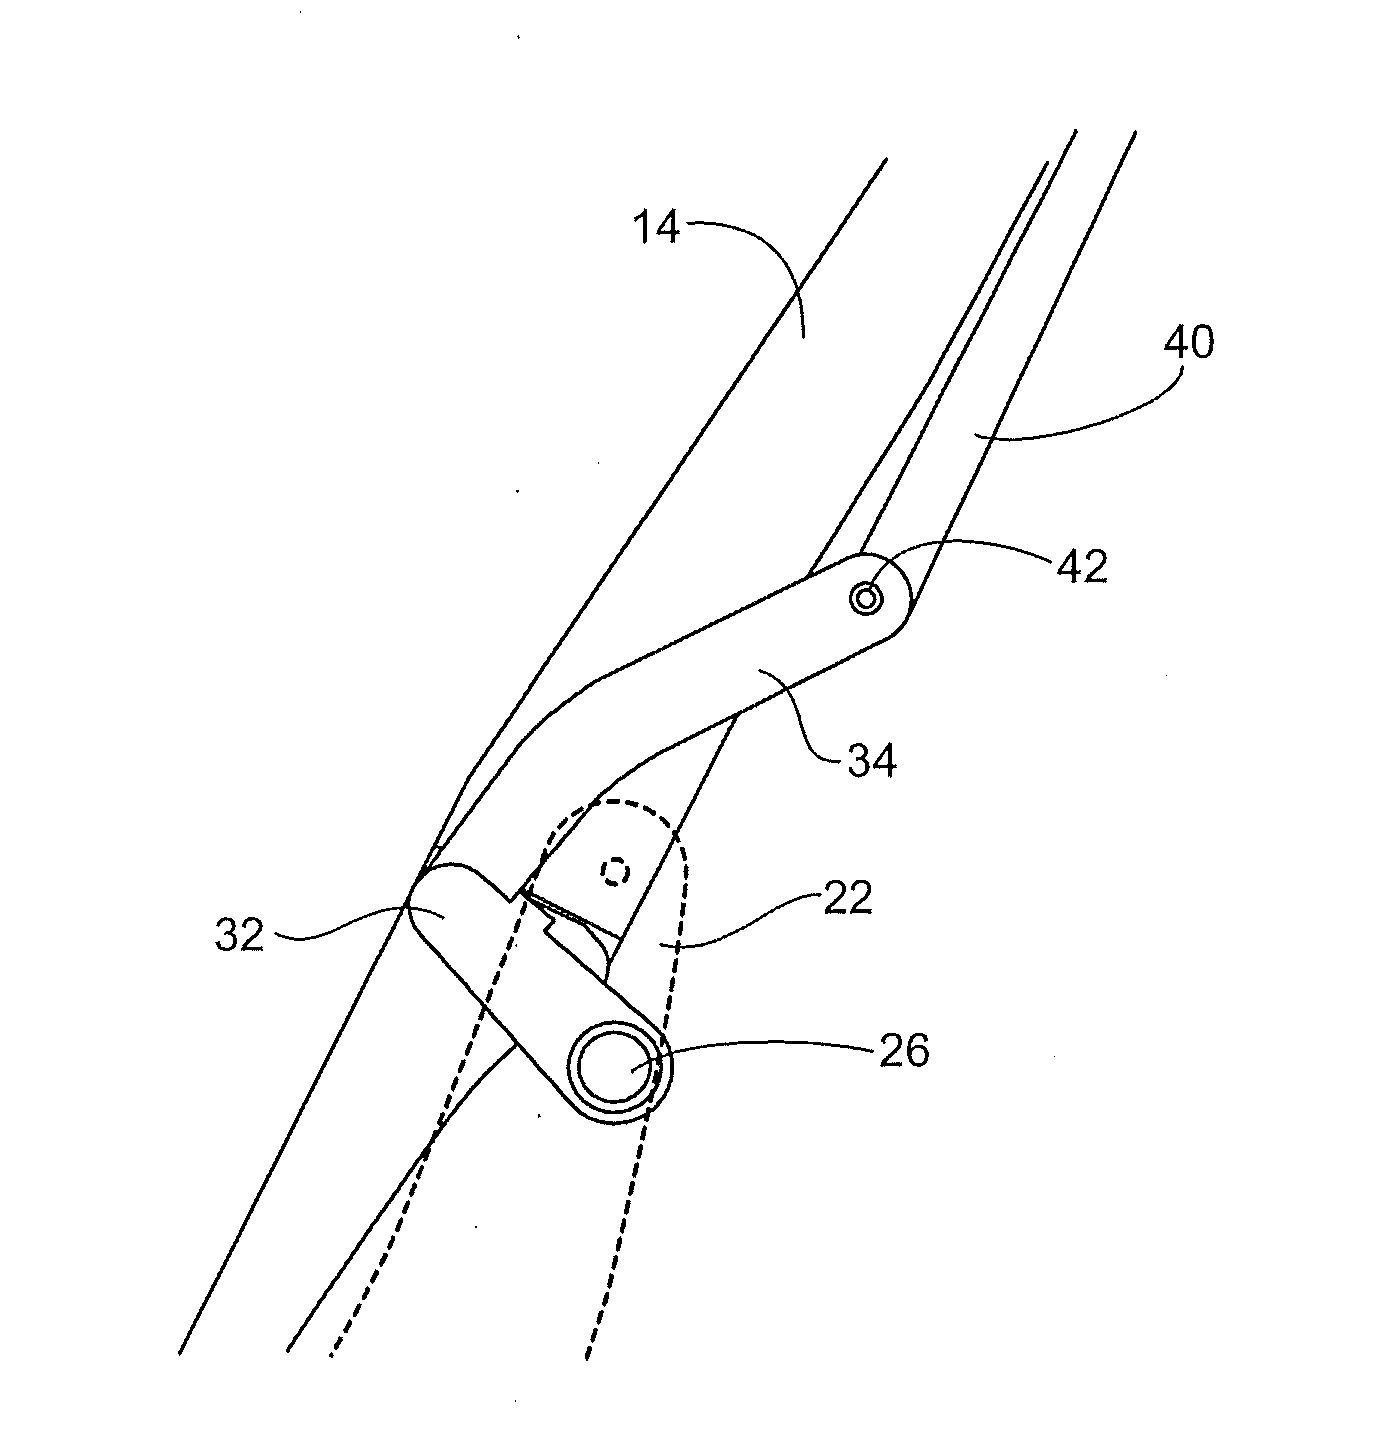 Passenger seat recline and tray table support mechanism